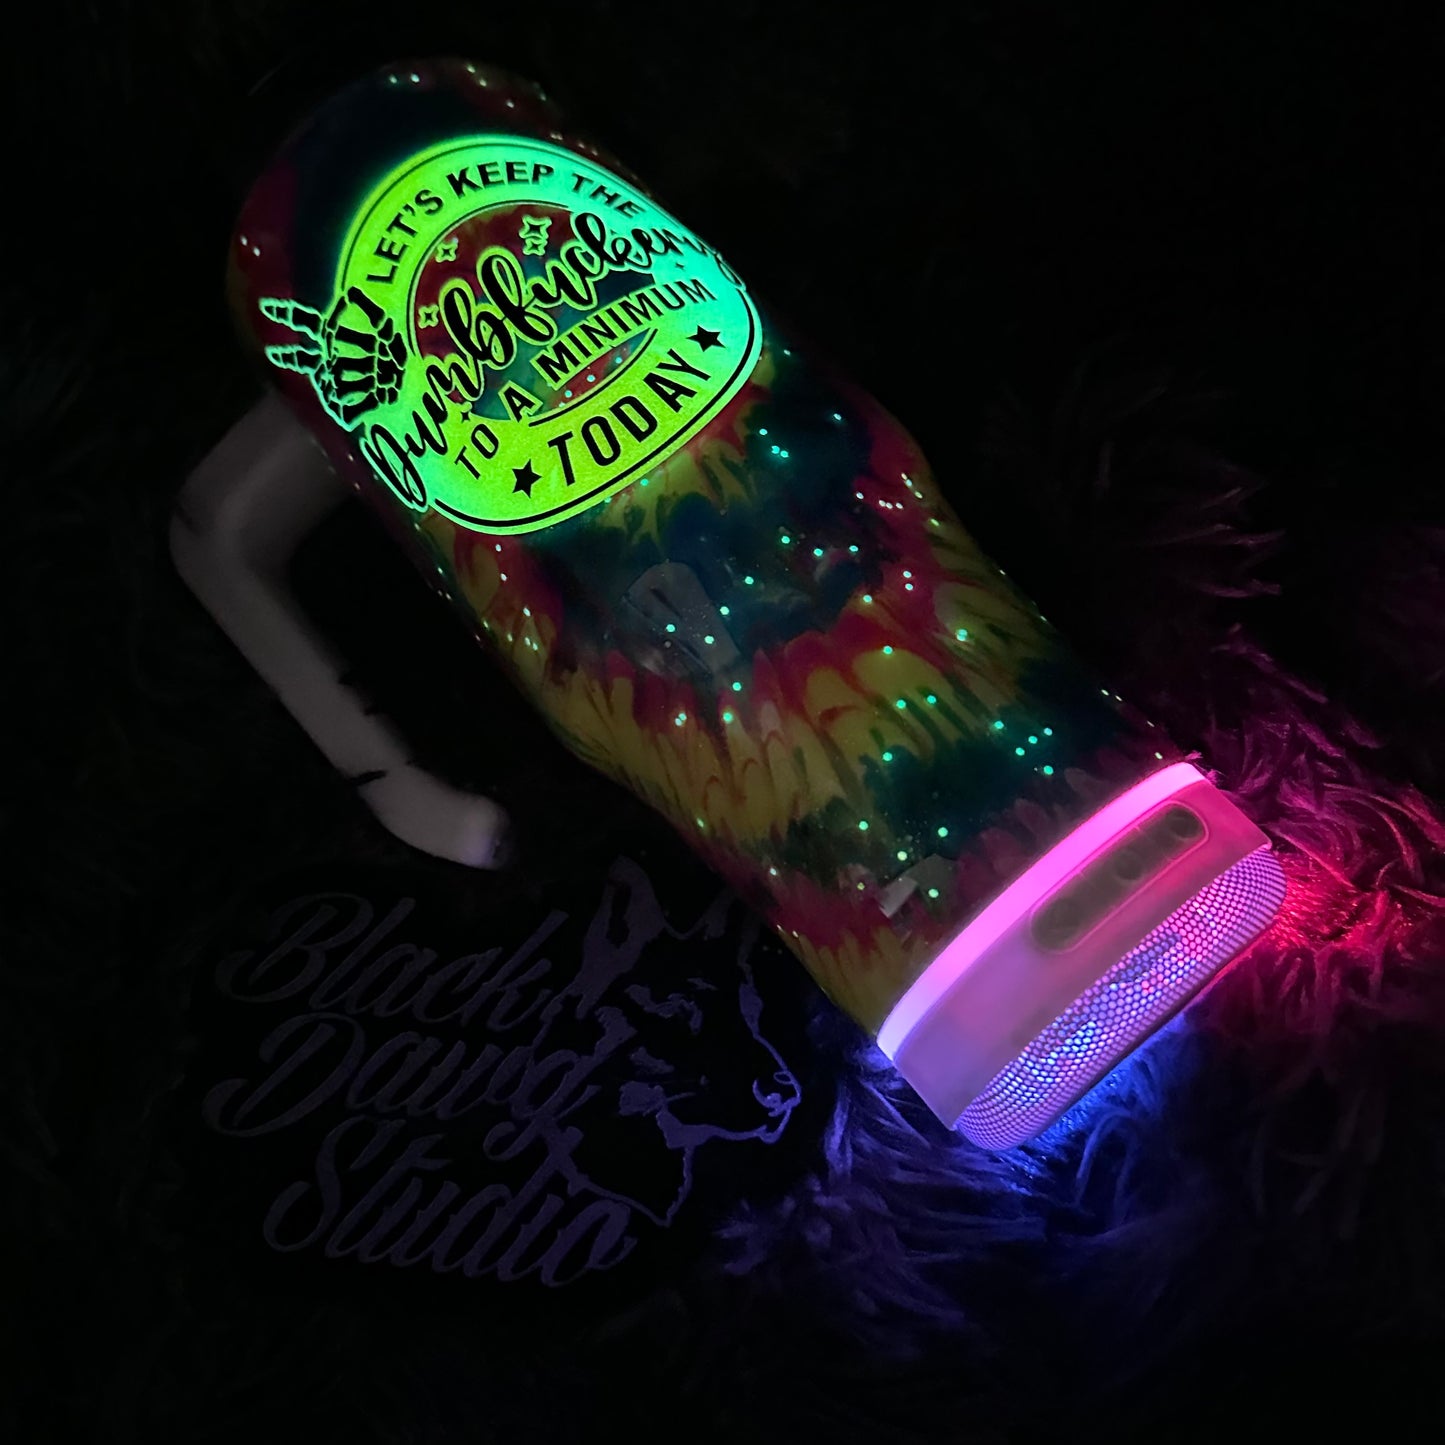 RTS 30oz Grippy Bluetooth Speaker Tumbler Neon Tie Dye | Let’s Keep The Dumbfuckery To A Minimum Today decal | Glow in the Dark